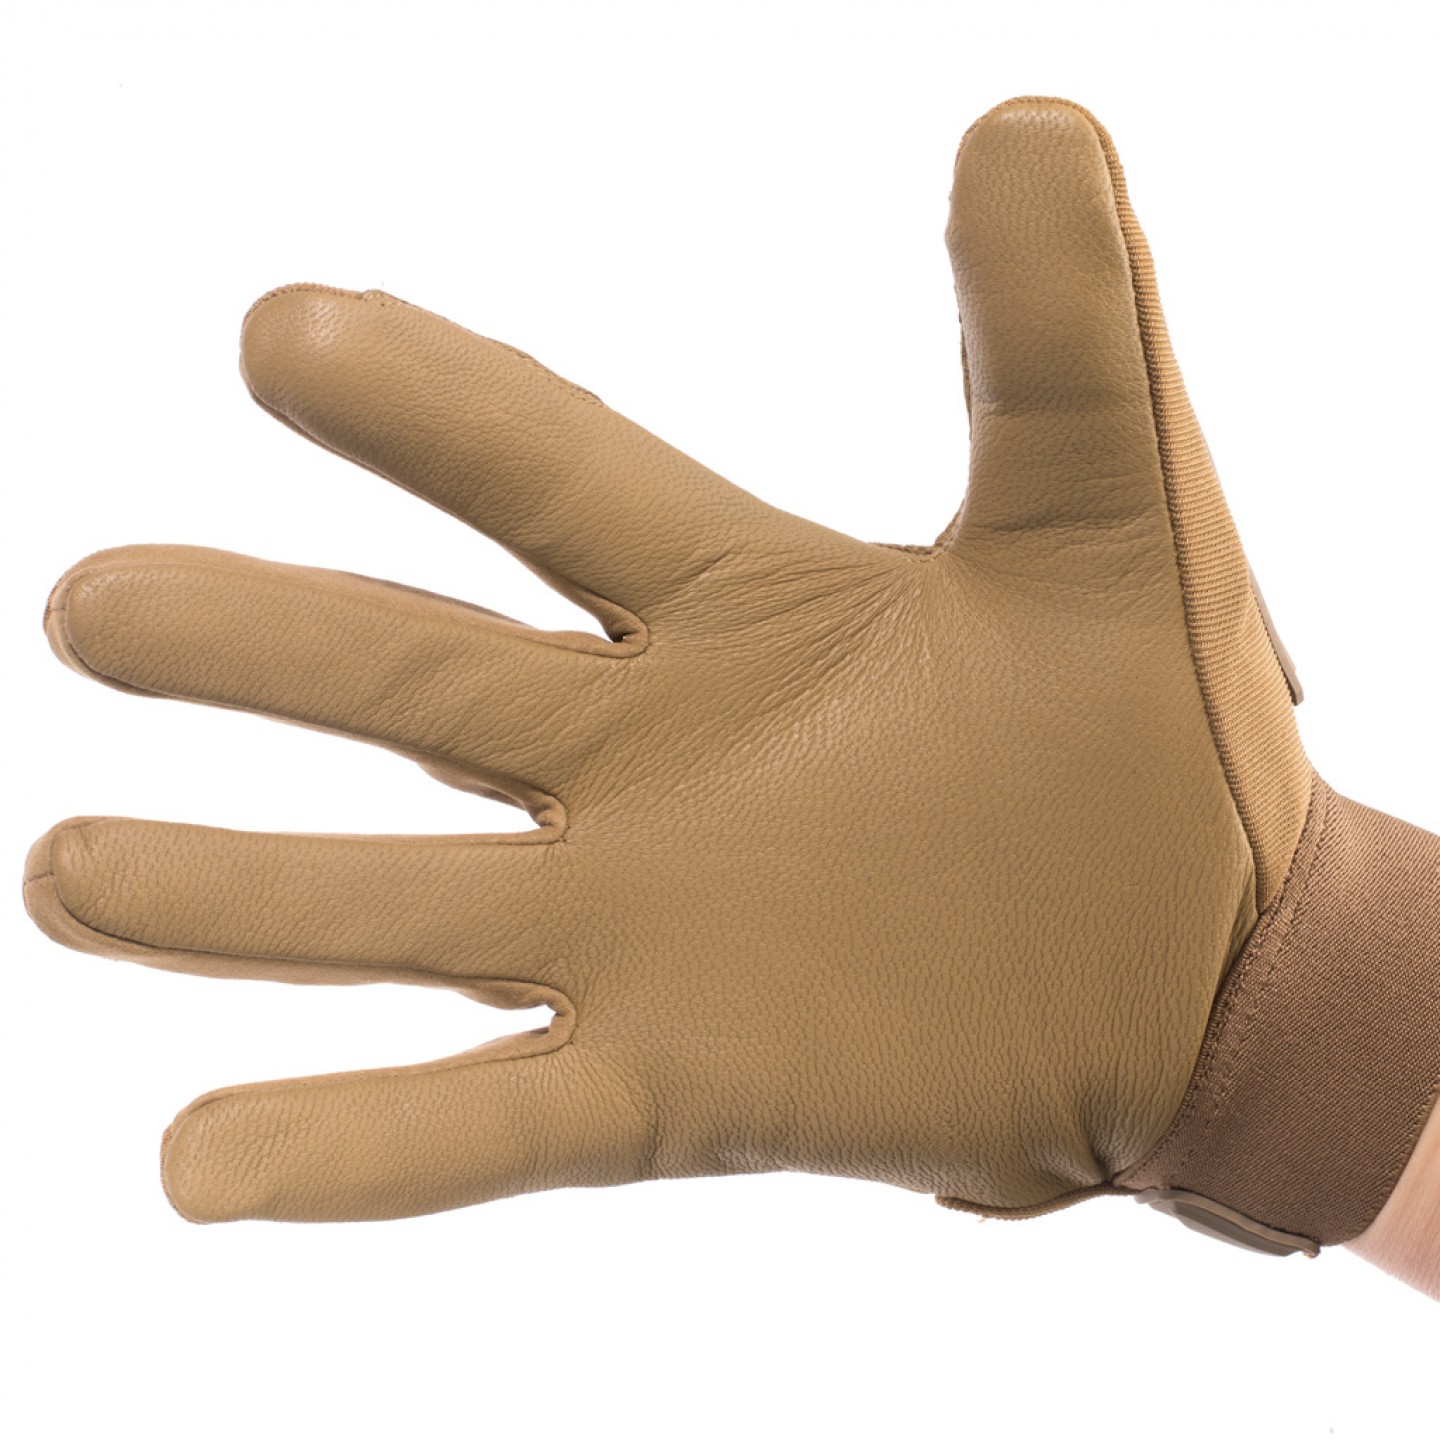 Gloves XL (Coyote Tan)